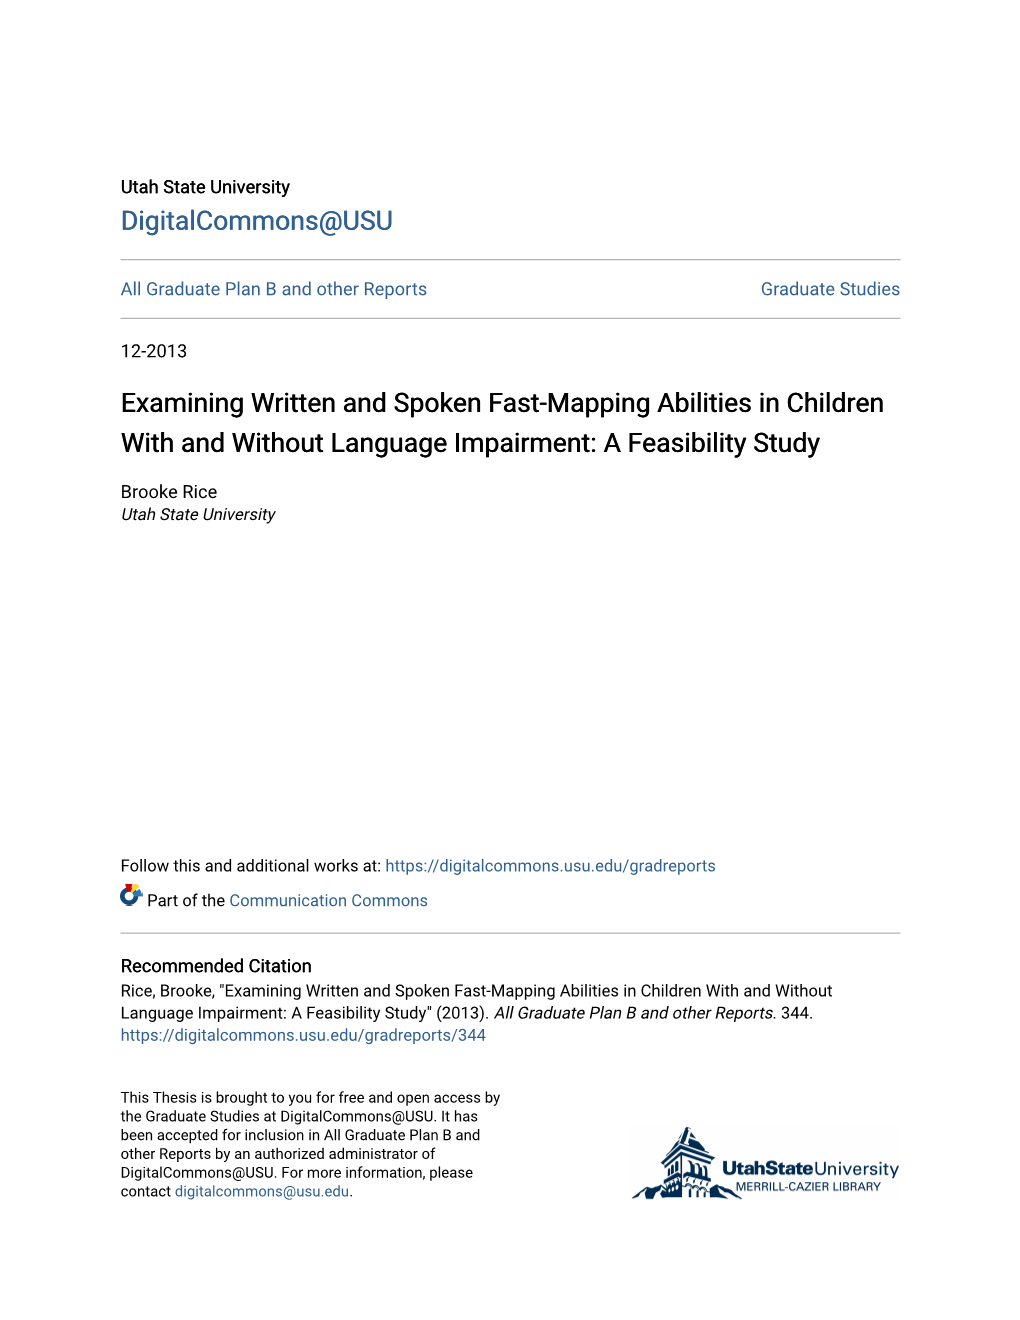 Examining Written and Spoken Fast-Mapping Abilities in Children with and Without Language Impairment: a Feasibility Study